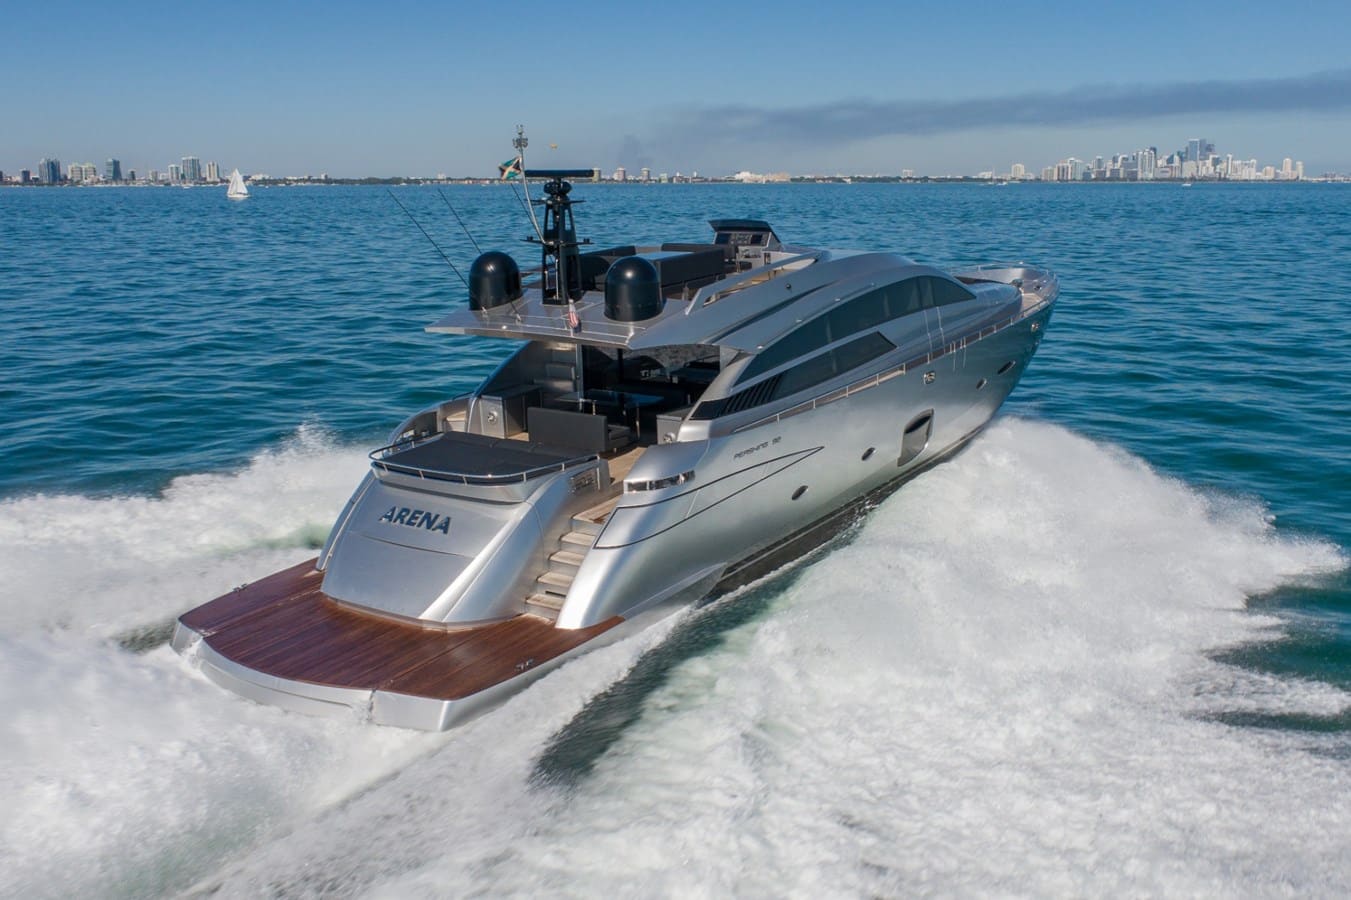 about Florida Yachts International in Miami